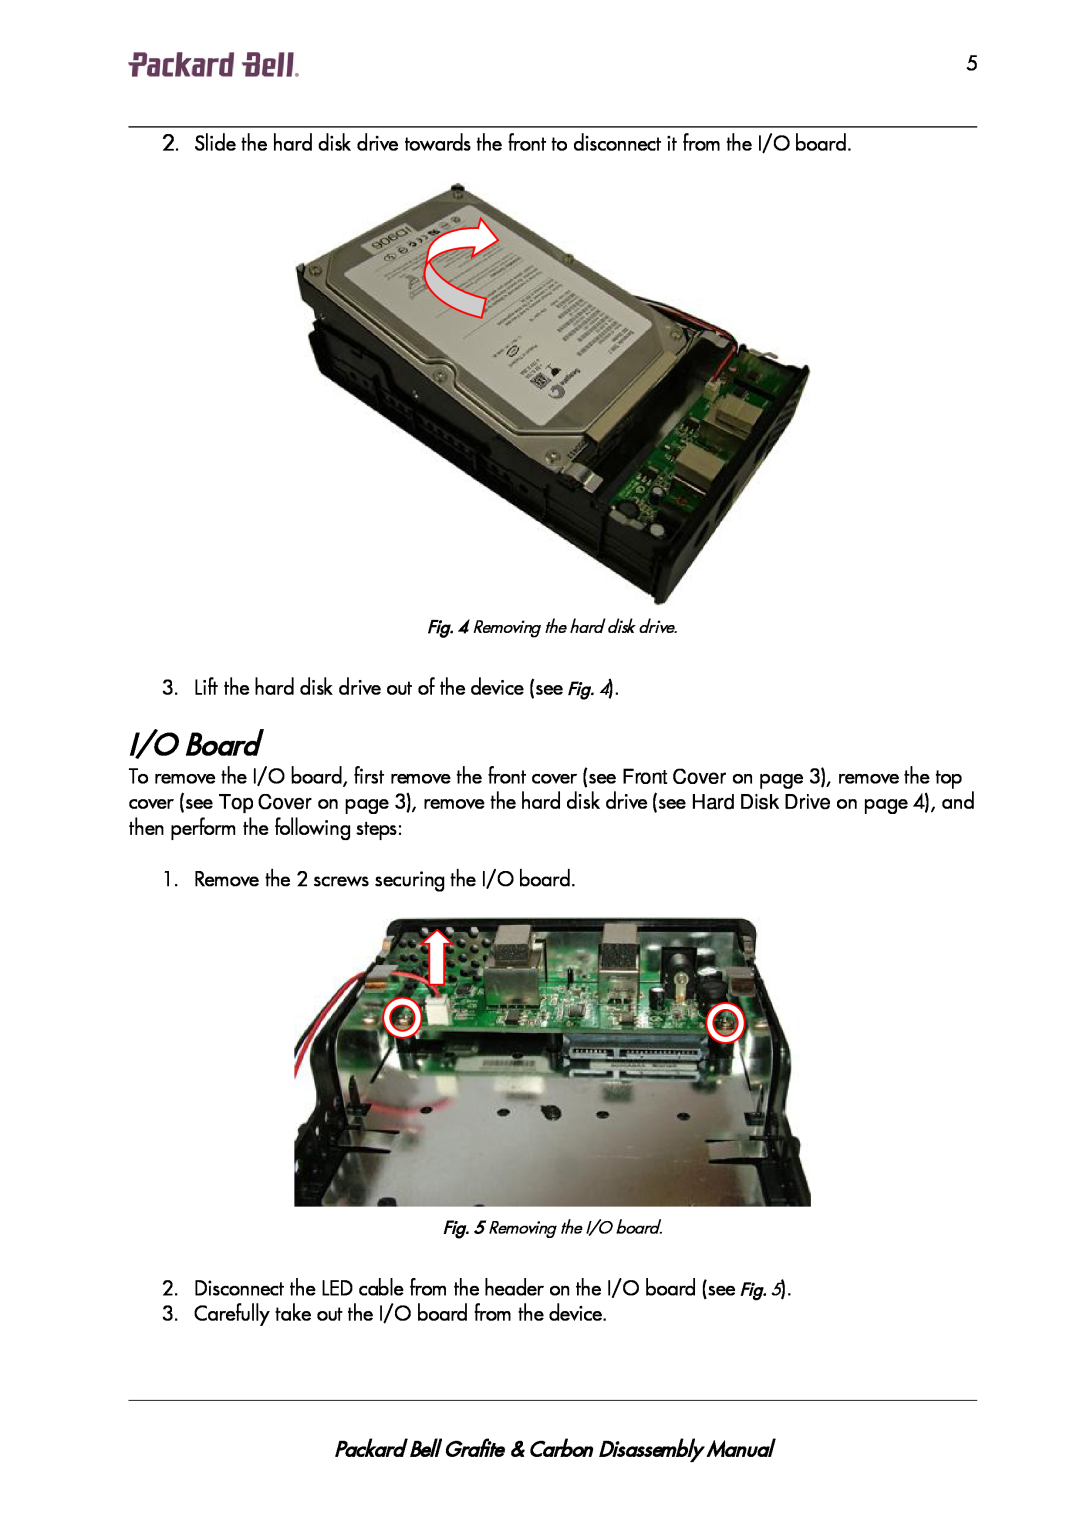 Packard Bell CS036A00 manual I/O Board, Packard Bell Grafite & Carbon Disassembly Manual 